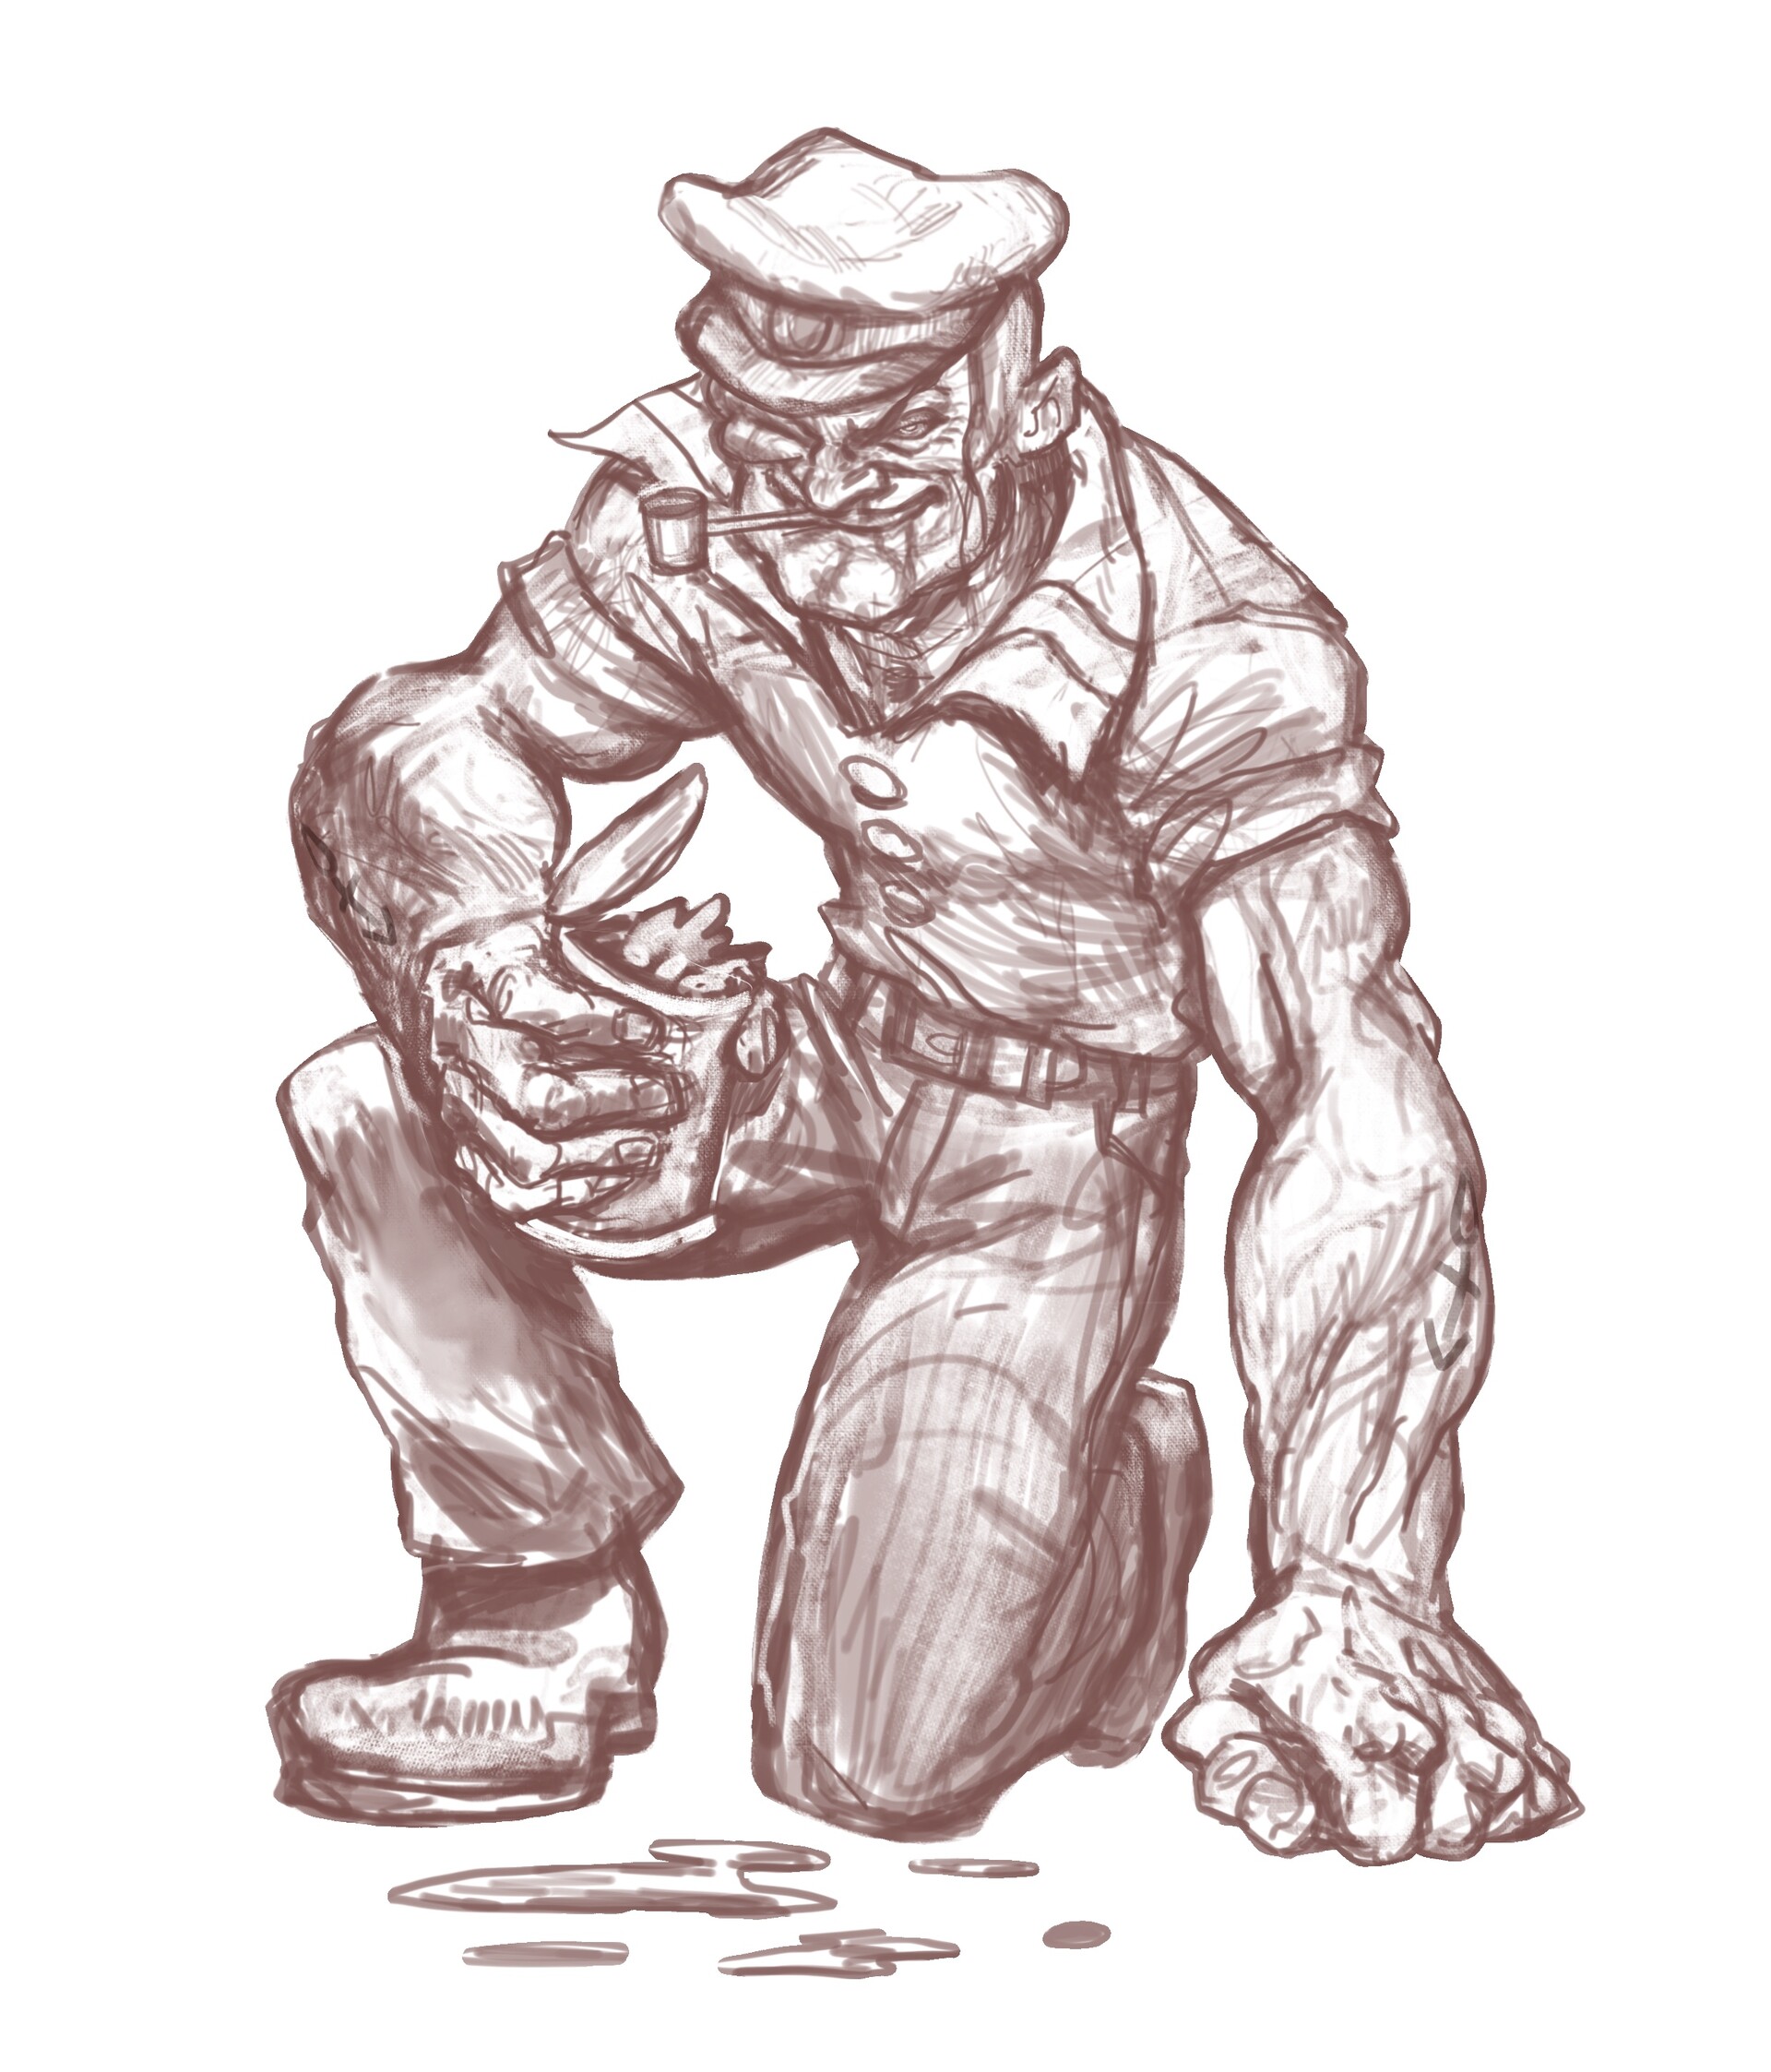 How to draw Popeye the Sailor in 18 steps - Sketchok easy drawing guides